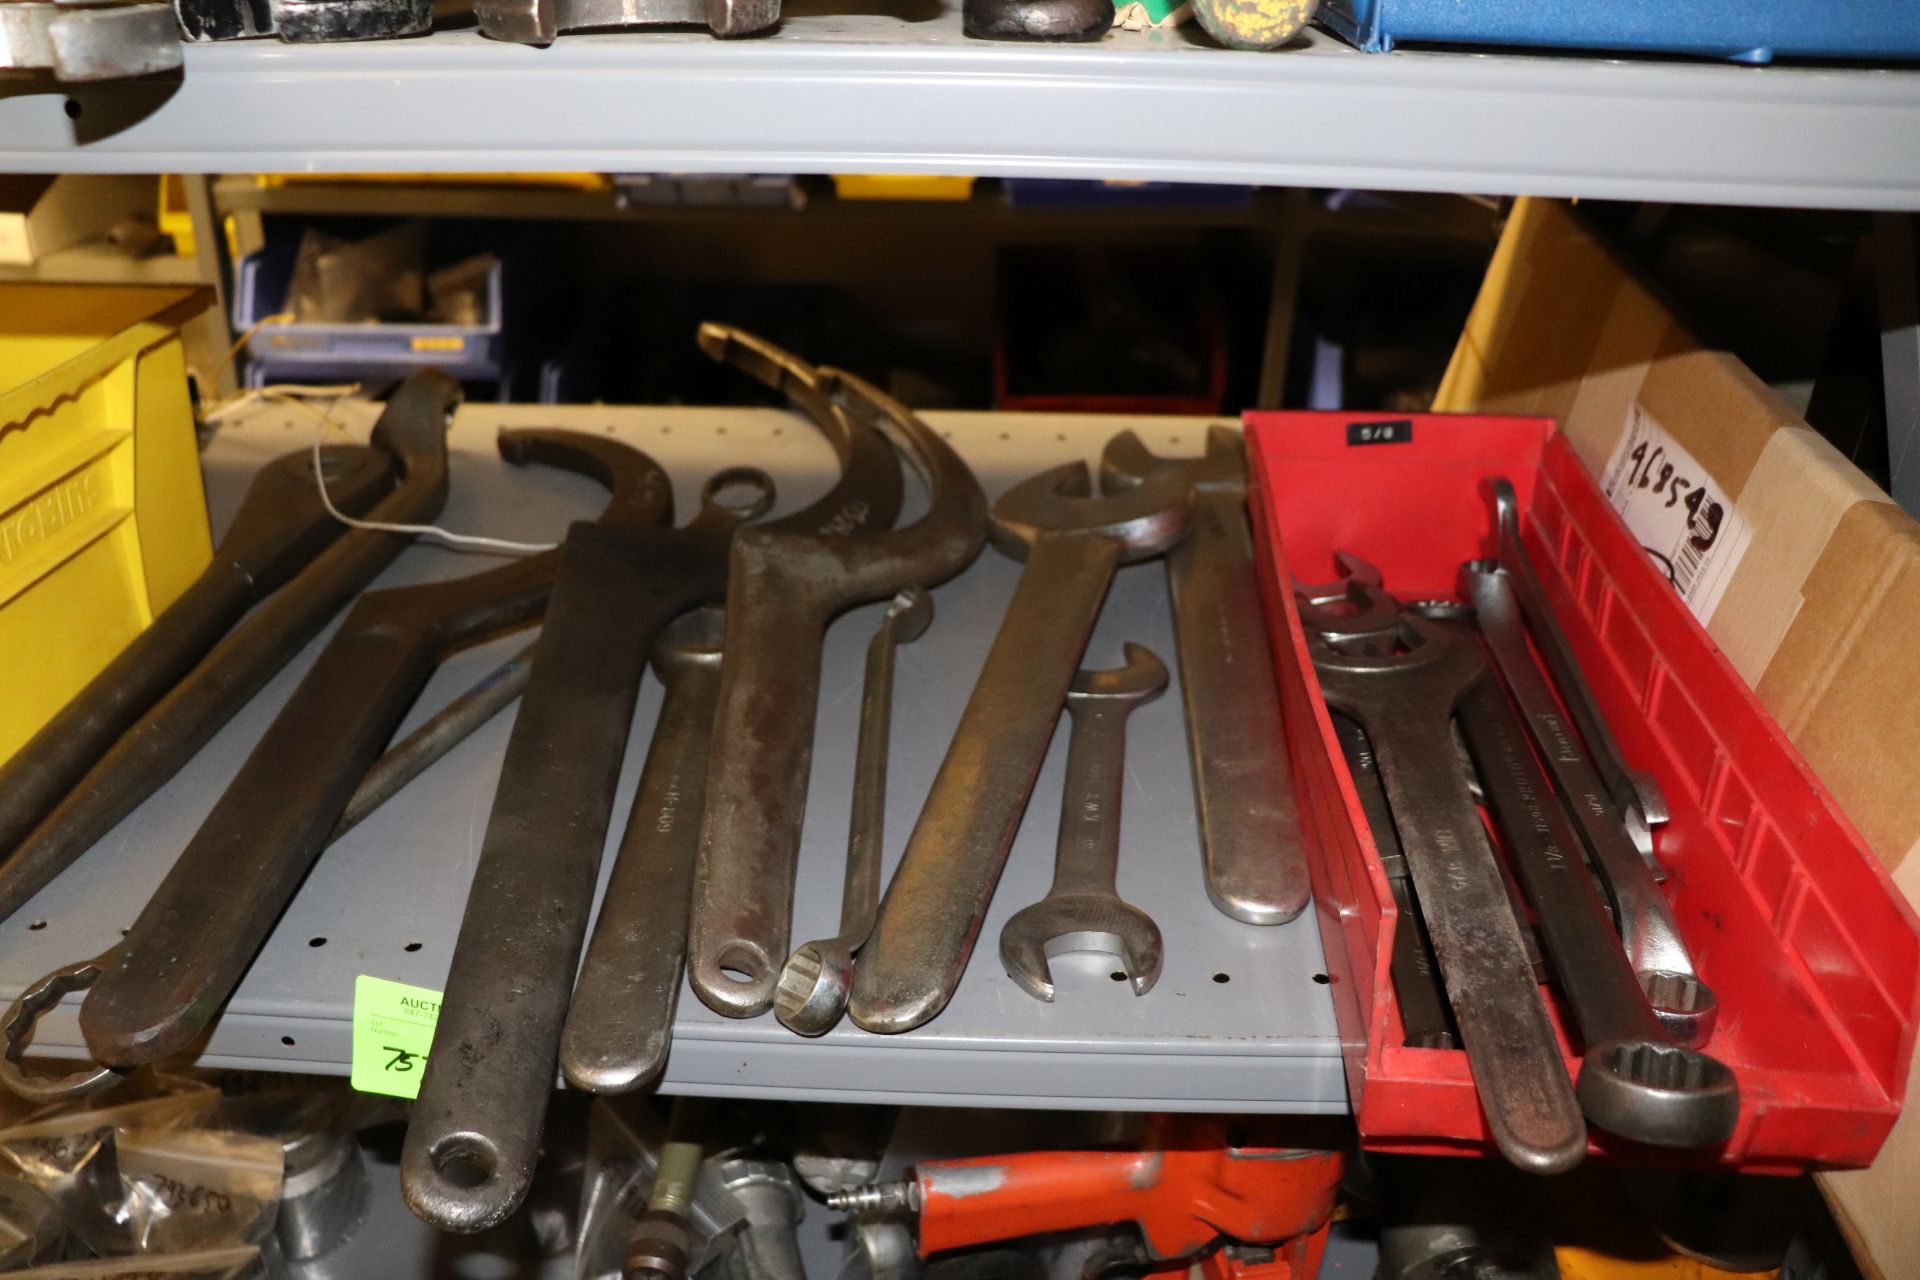 One shelf of wrenches